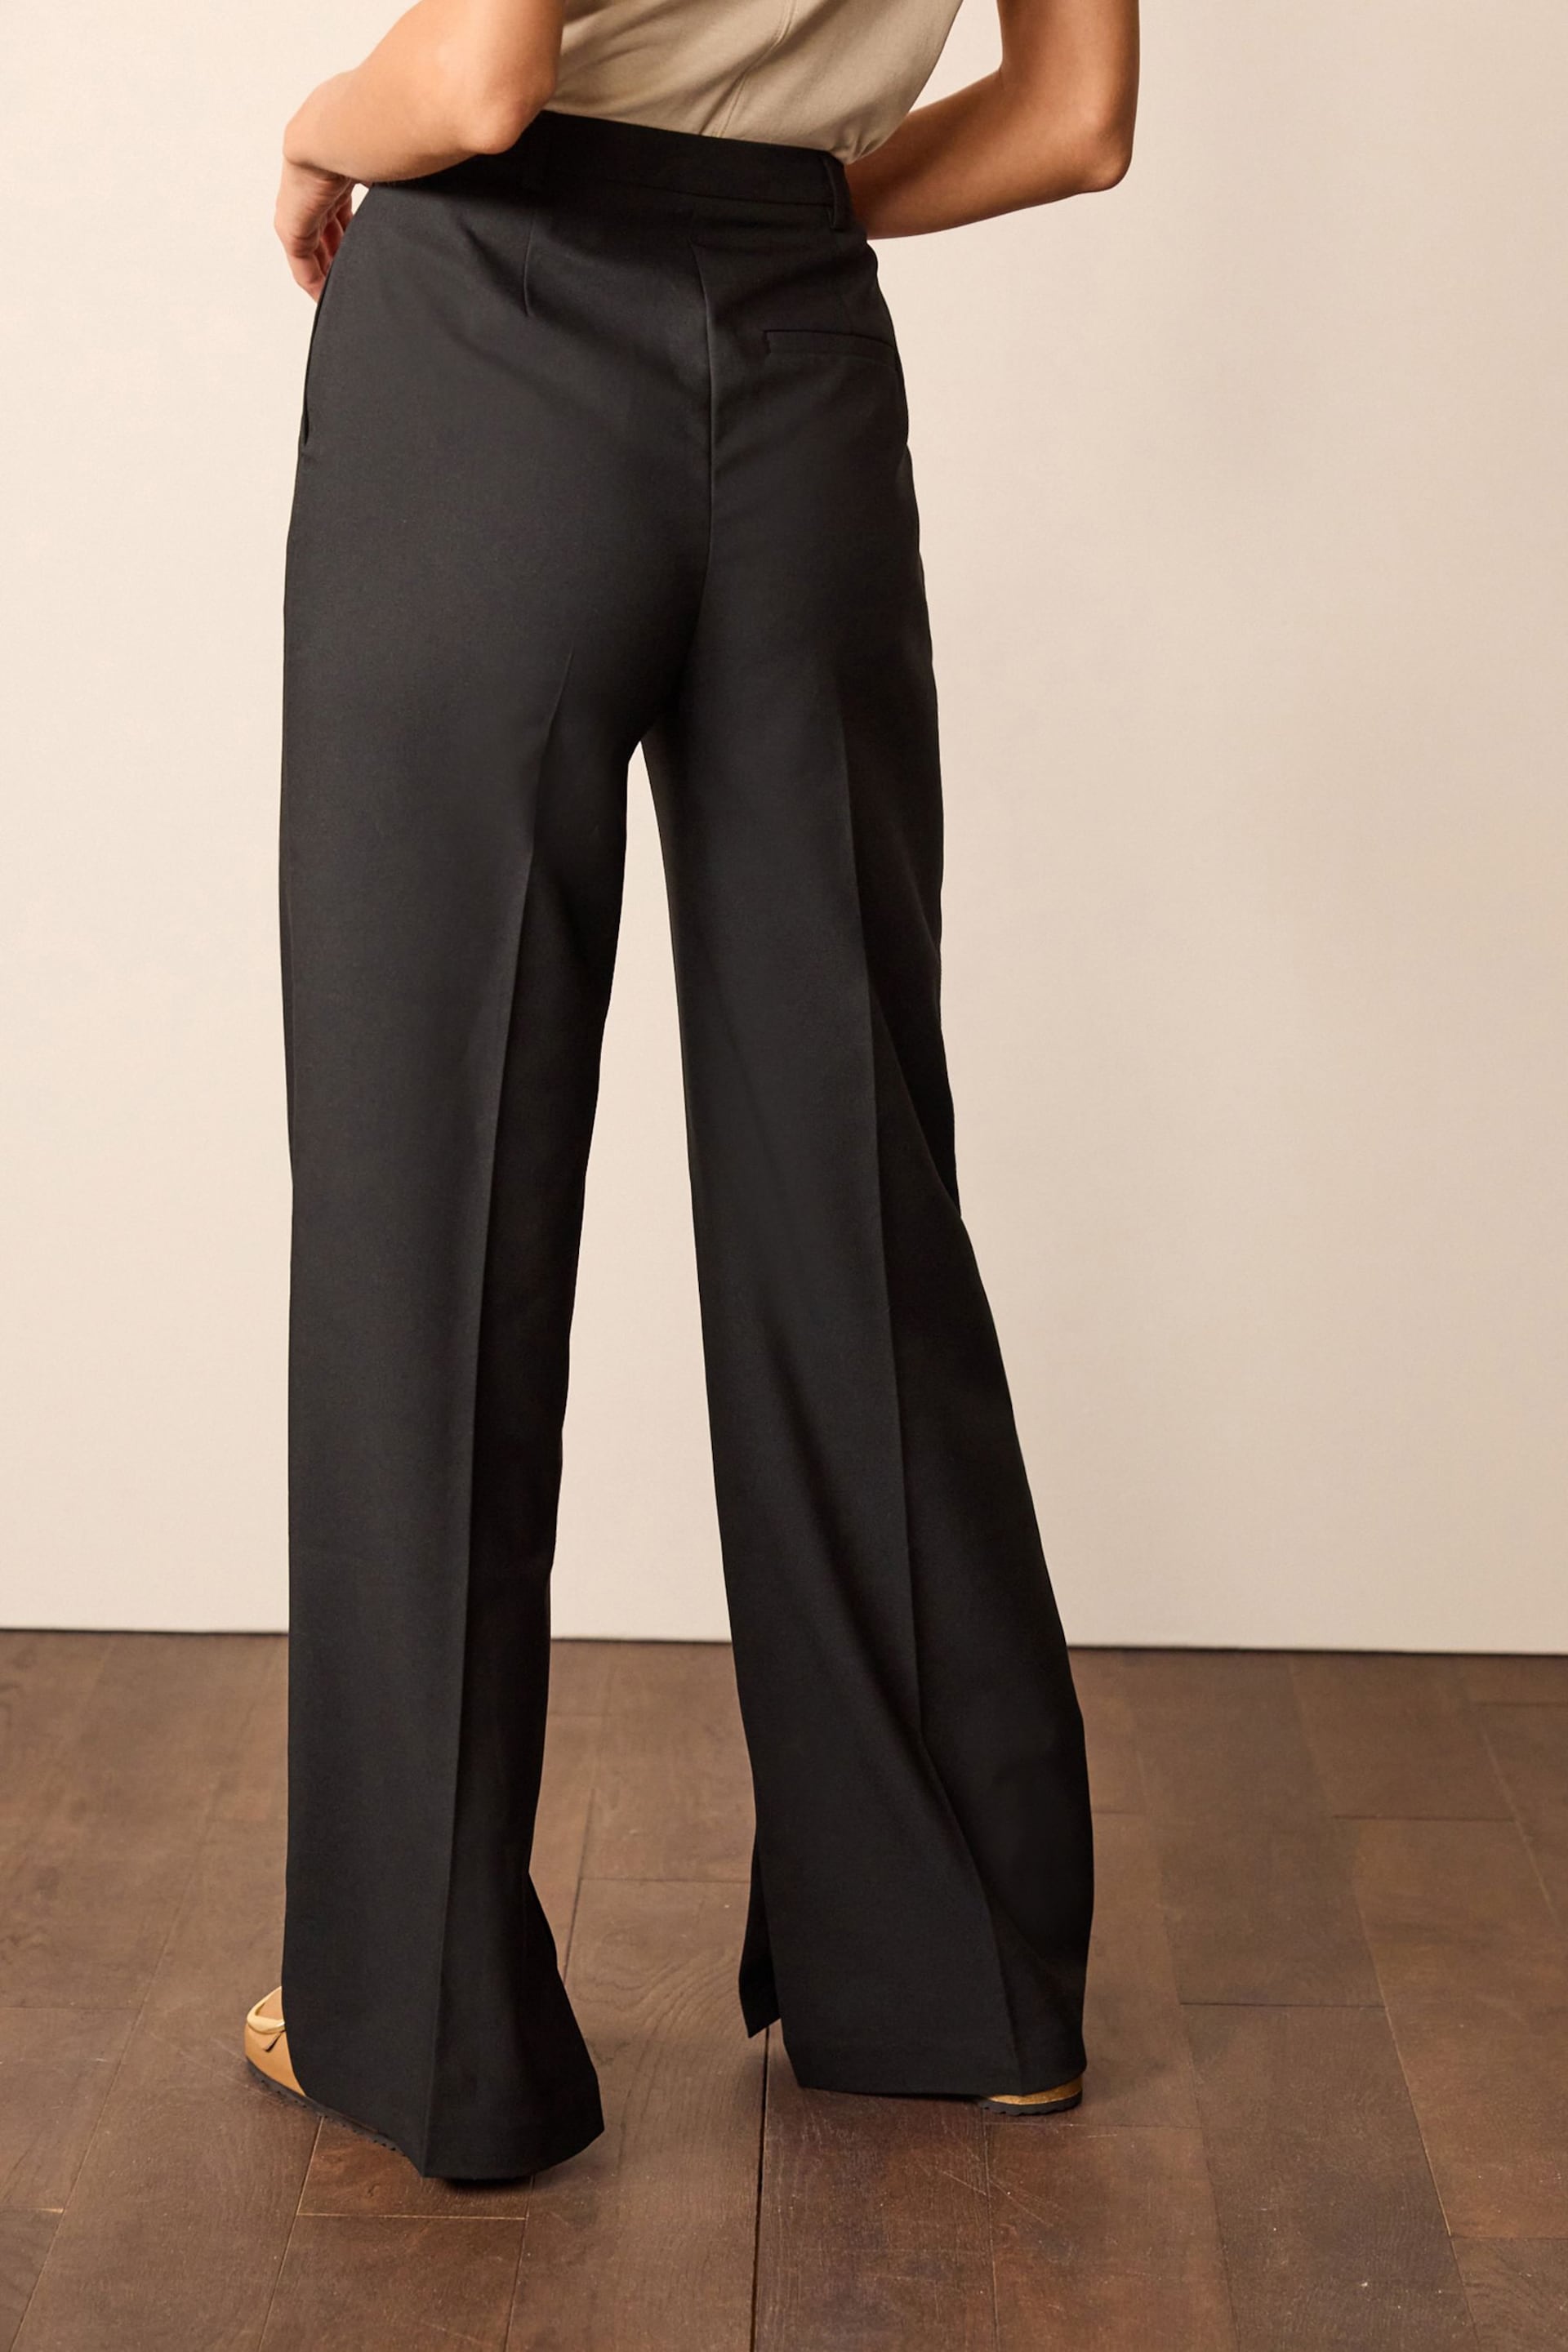 Black Tailored Stretch Wide Leg Trousers - Image 4 of 7